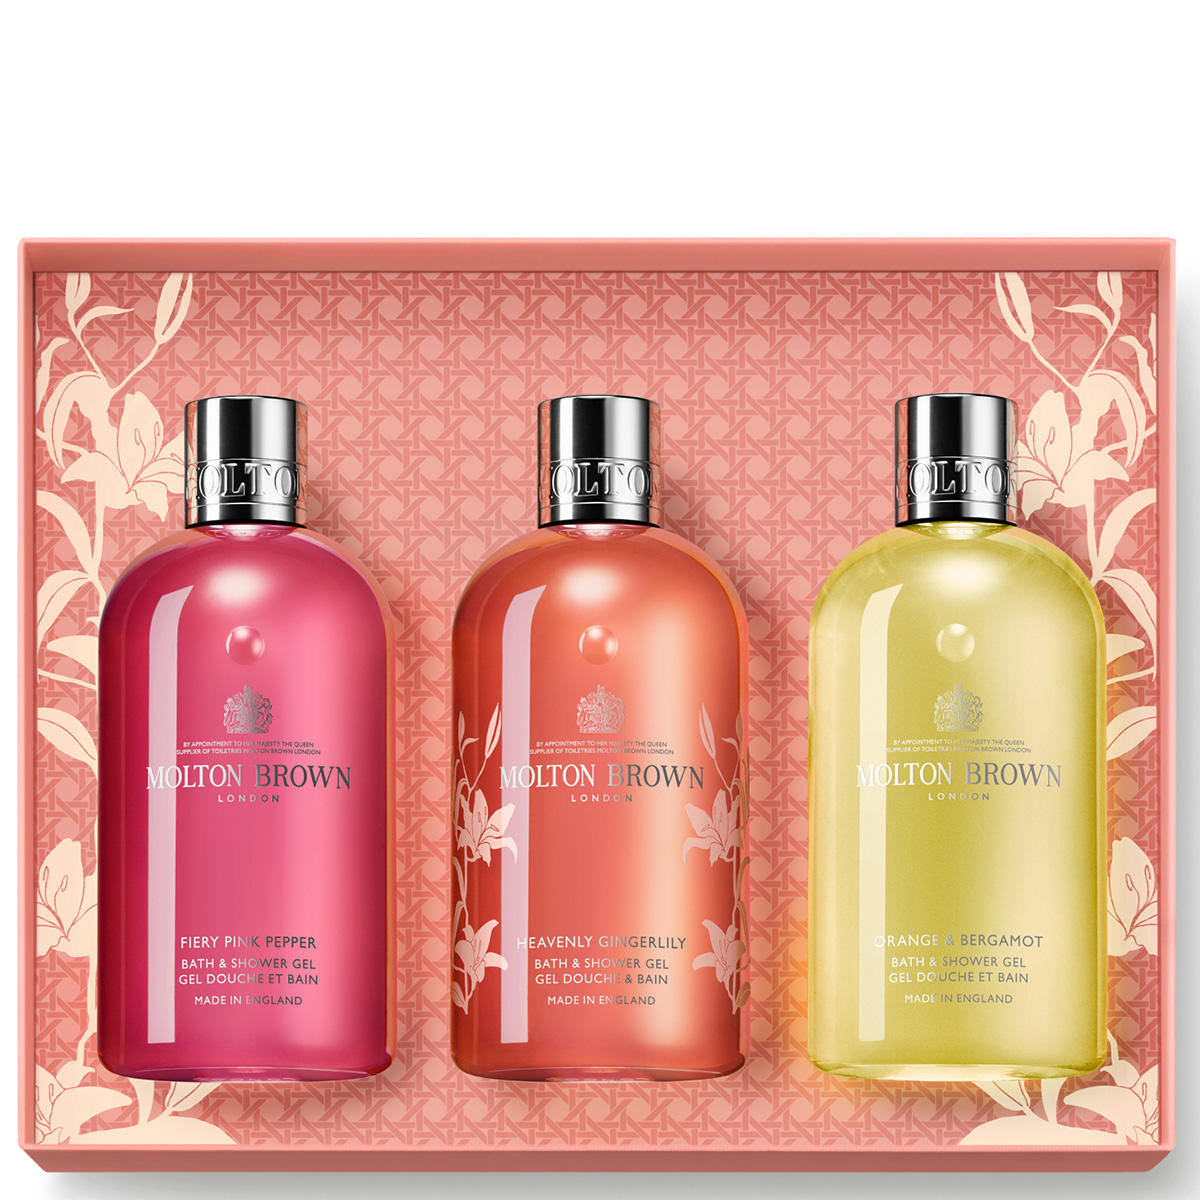 MOLTON BROWN Floral & Citrus Gift Set Limited Edition  - 1